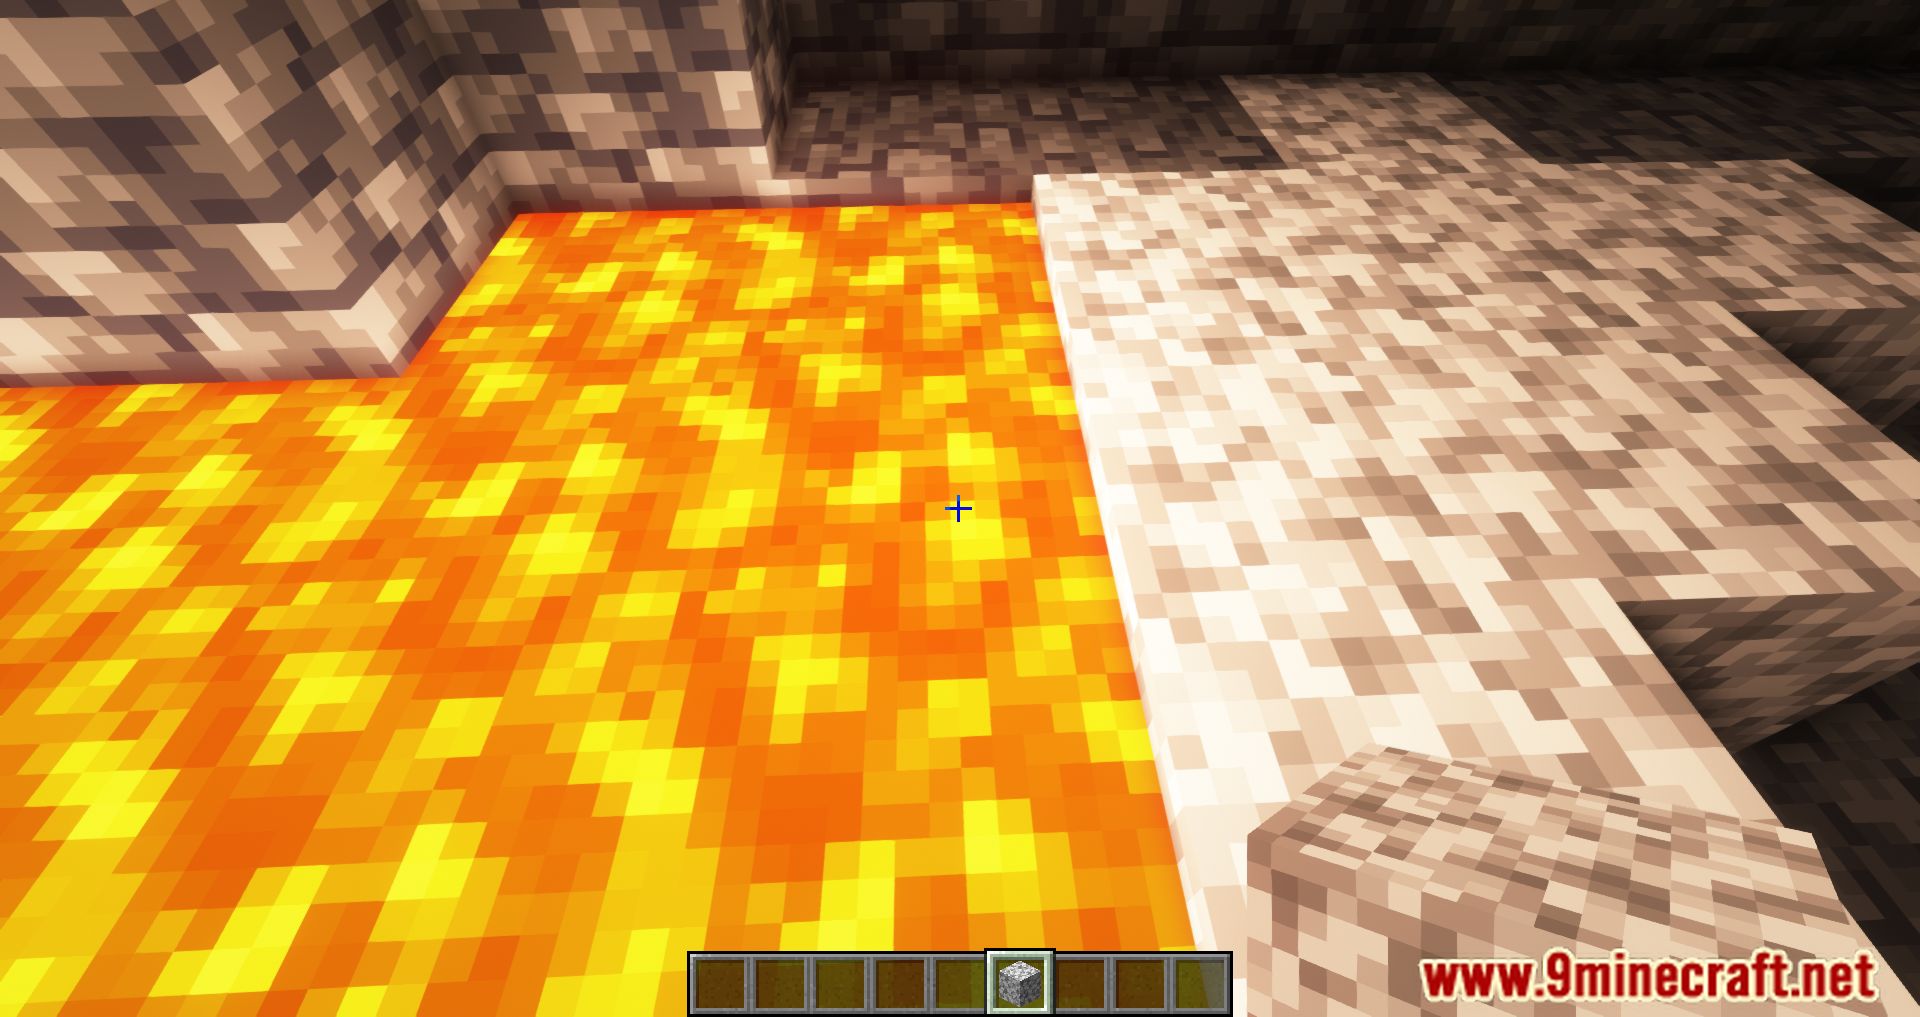 Cannot Build Over Lava Source Blocks Mod (1.20.1, 1.19.4) - More Complex And Challenging 6